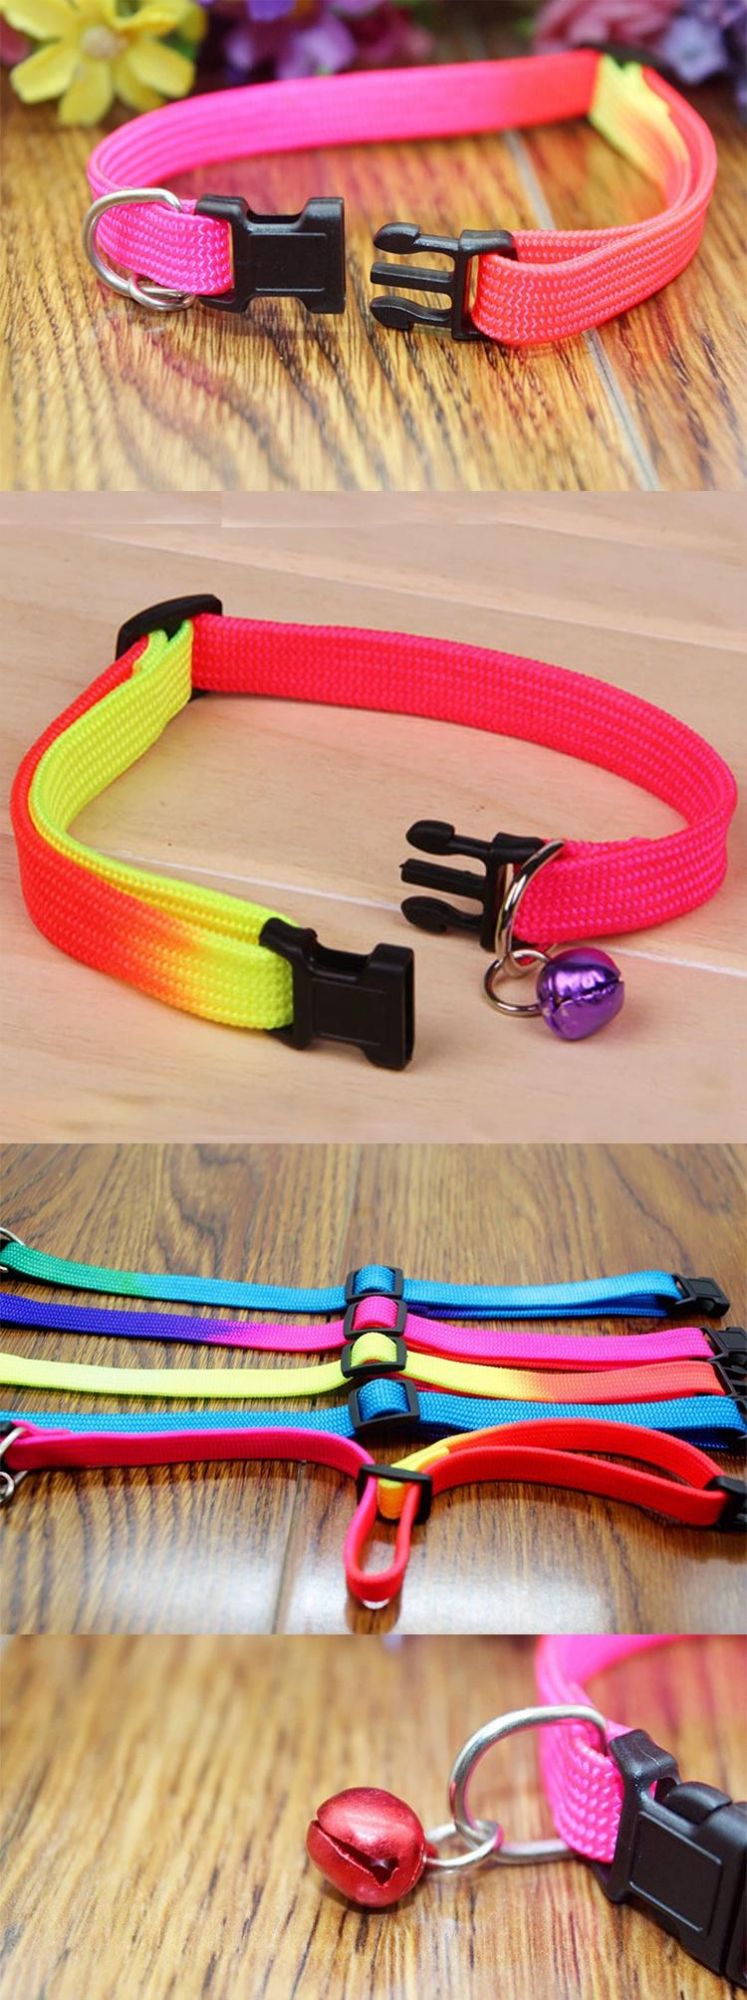 Wholesale Designer Dual Color Dog Collars Cute Adjustable Colorful Pet Dog Cat Collars with Breakaway Bells Double Color Pet Collar for Kitty Puppy